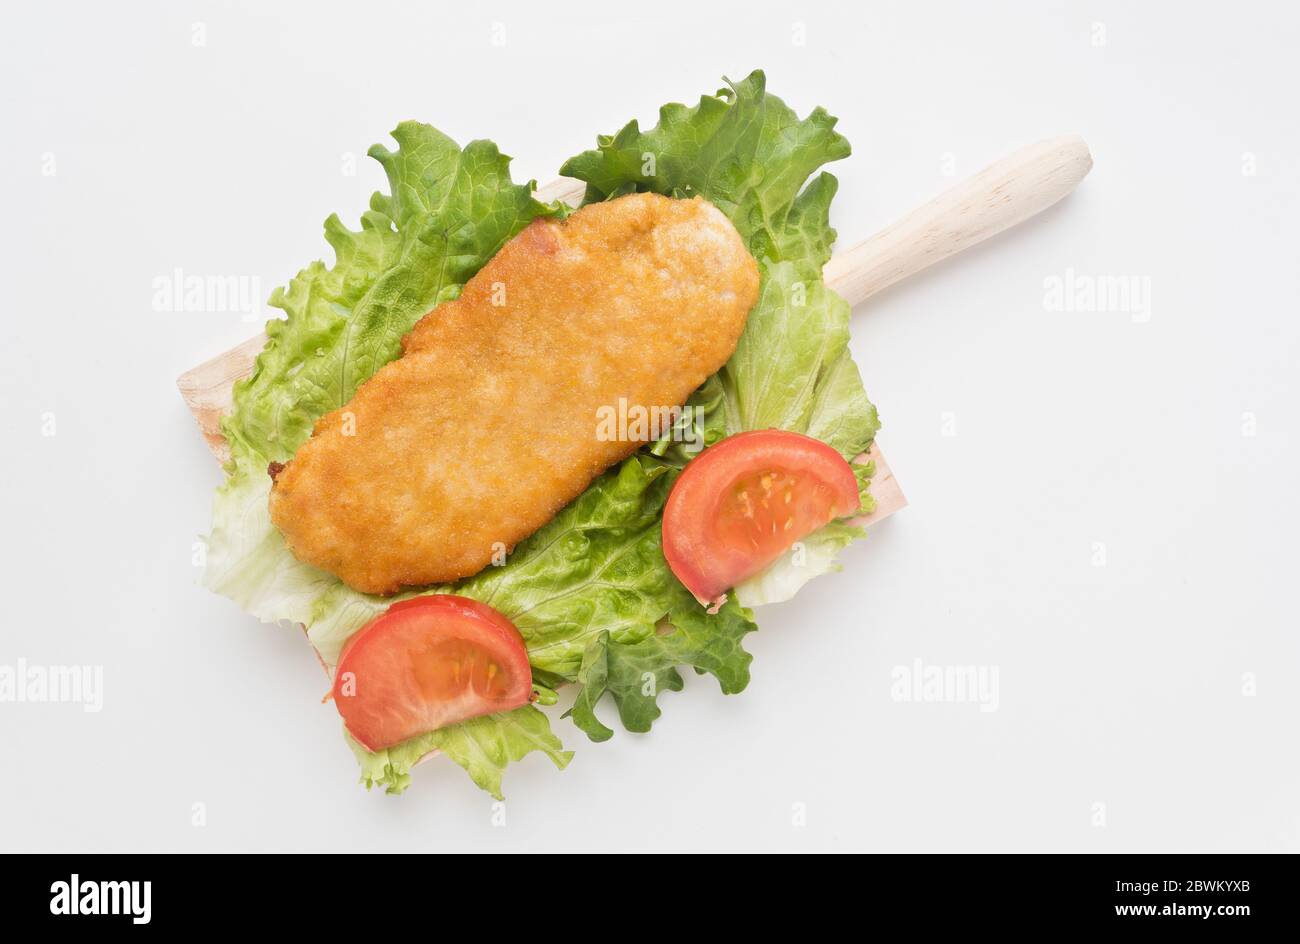 The cachopo consists of two large veal fillets, including Serrano ham and cheese. The whole is eaten fried and hot after being breaded in egg, flour a Stock Photo